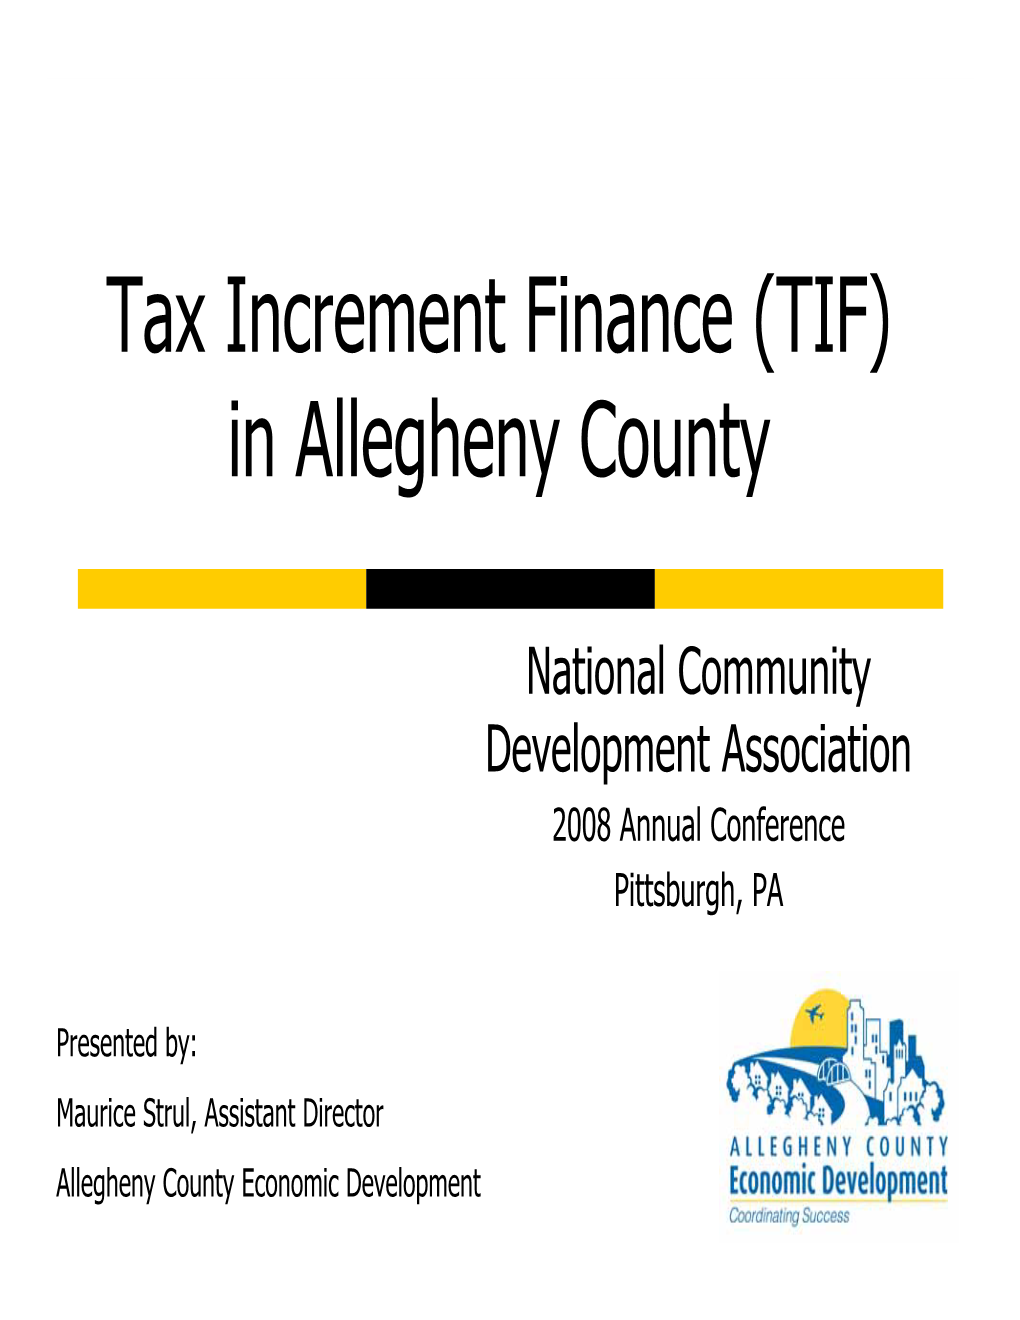 Tax Increment Finance (TIF) in Allegheny County